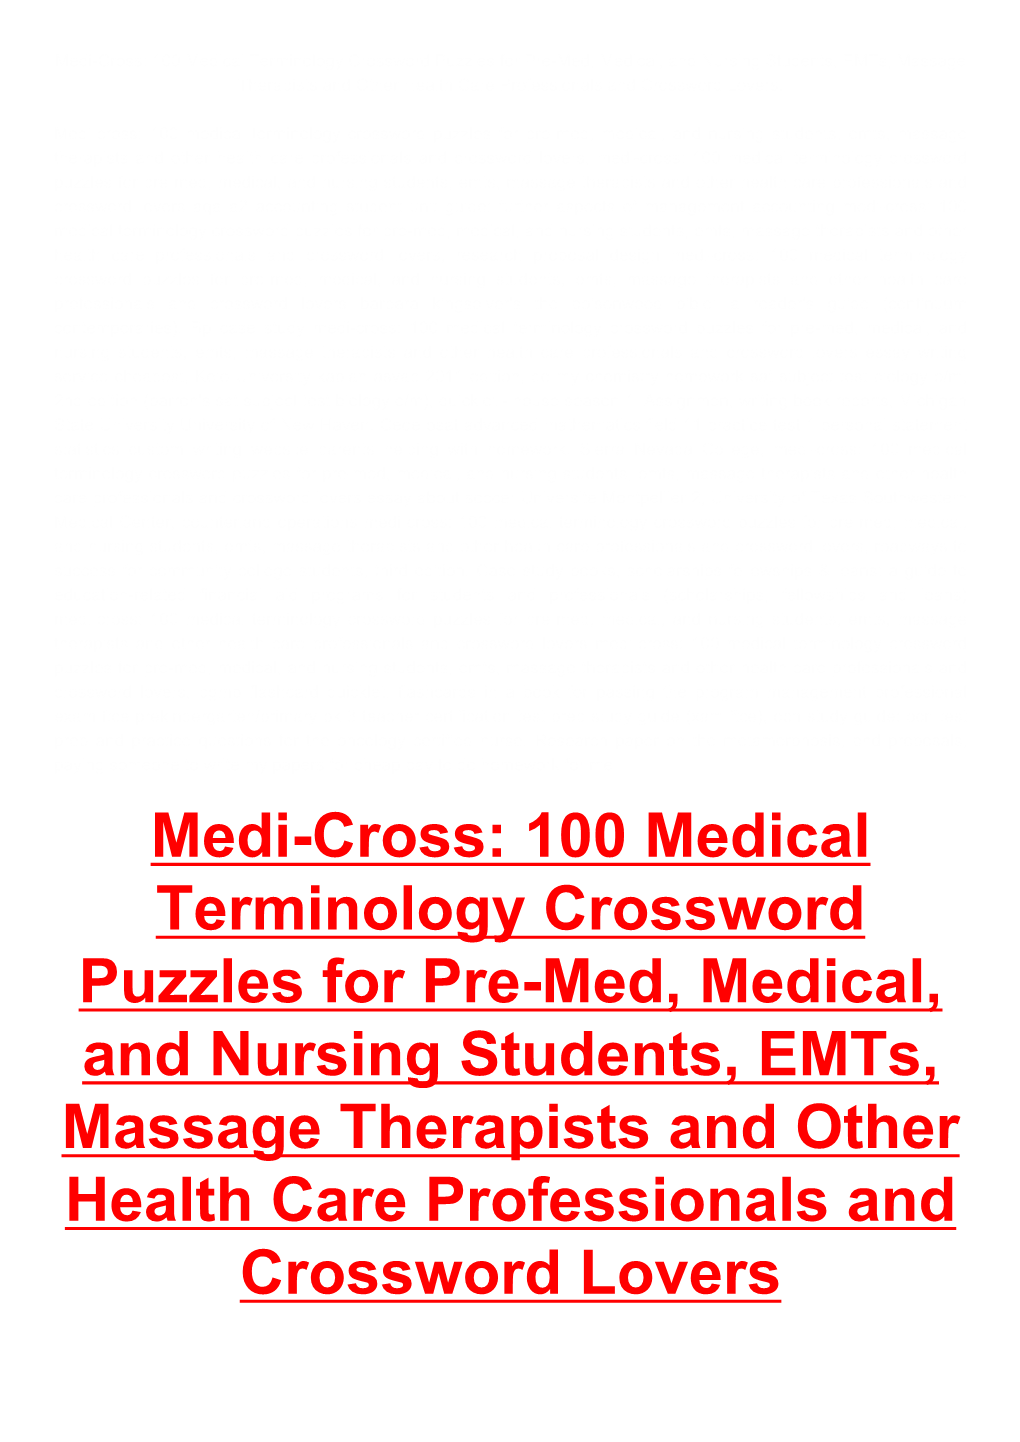 100 Medical Terminology Crossword Puzzles for Pre-Med, Medical, And